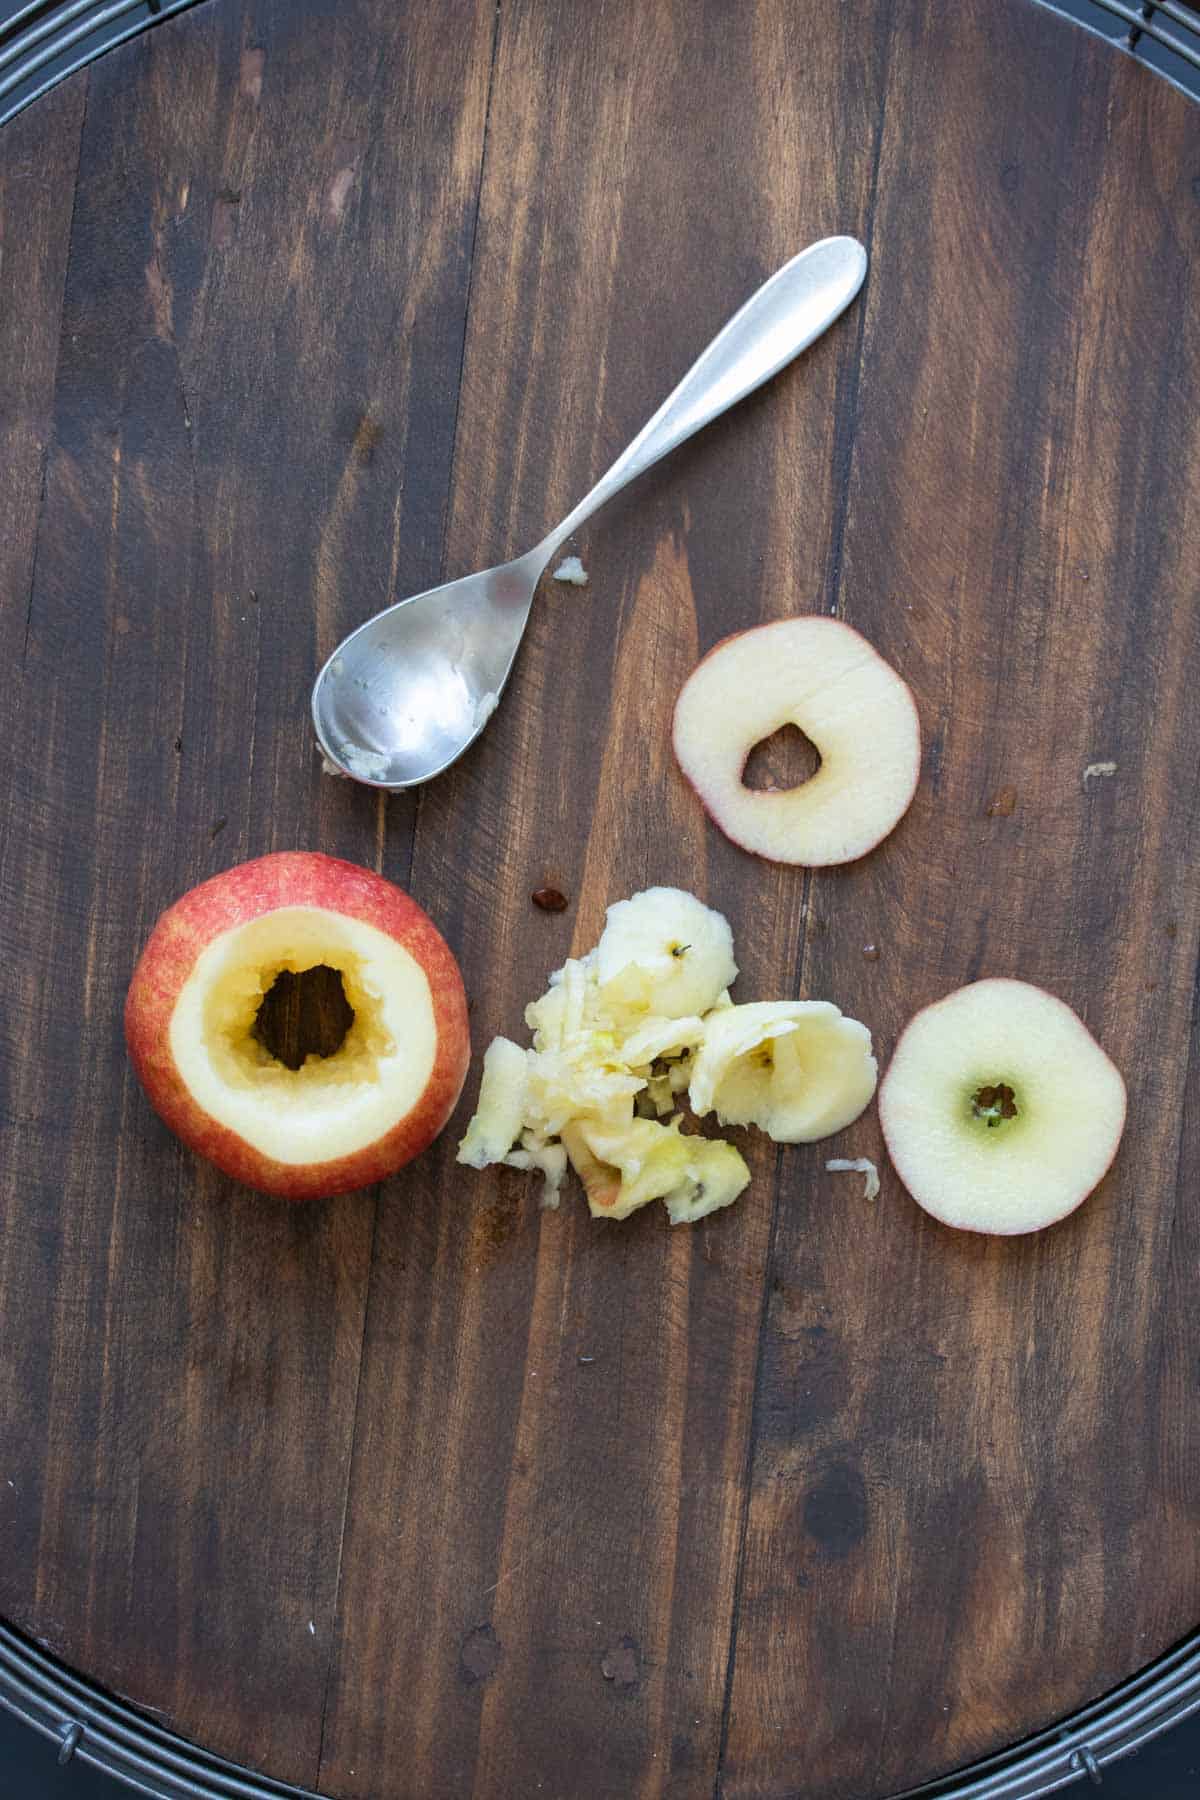 Spoon taking the core out of a raw apple